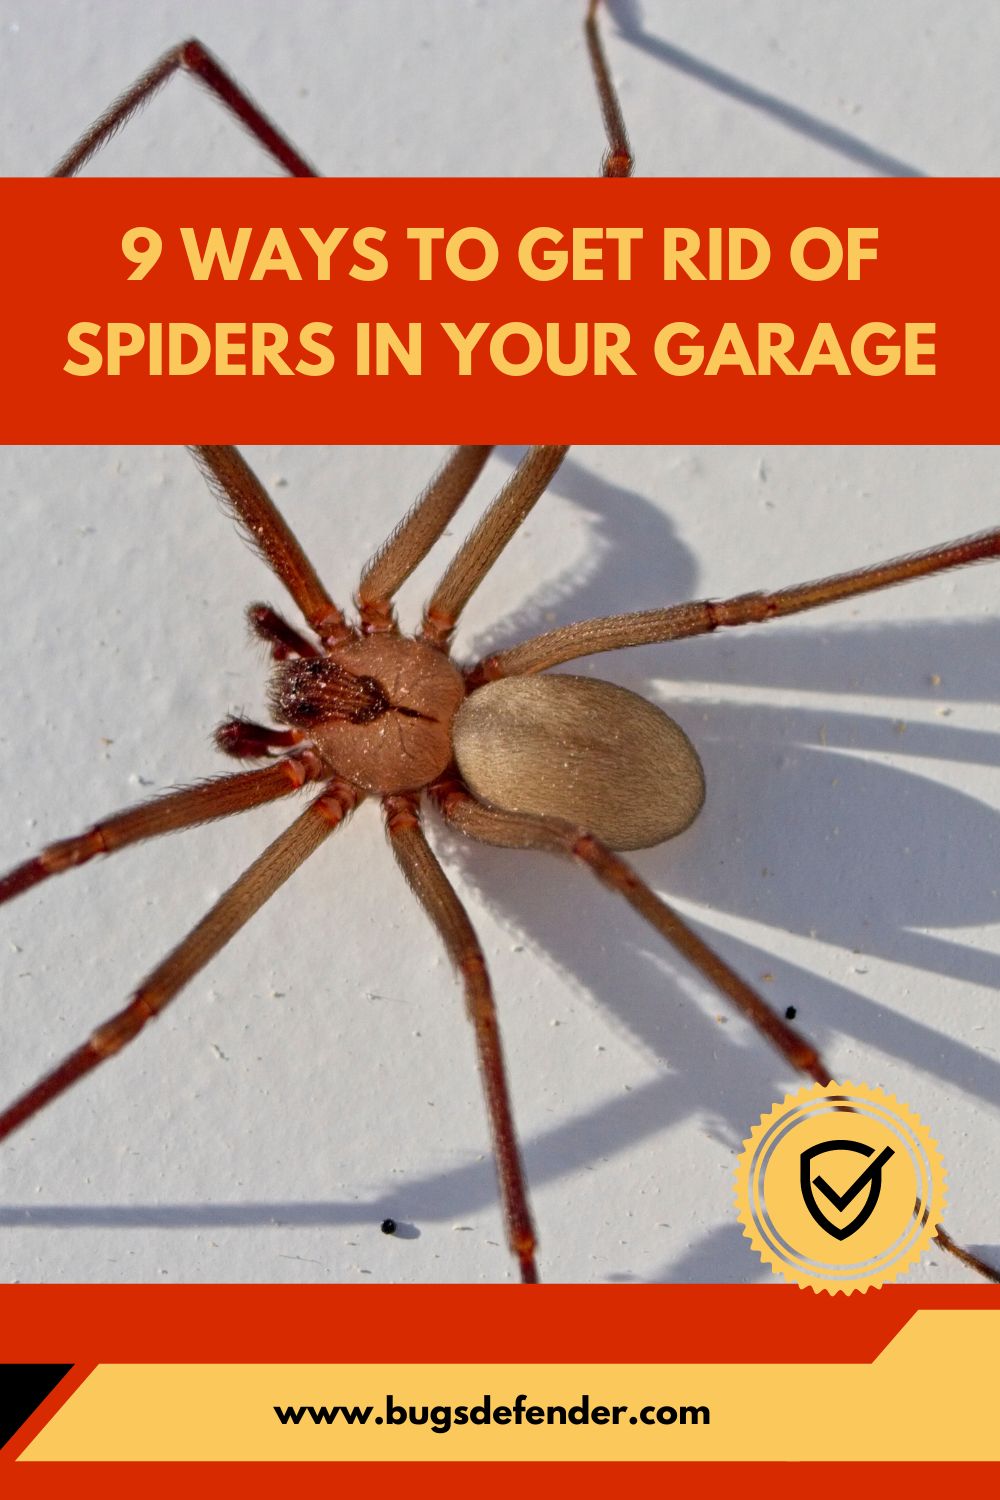 9 Ways to Get Rid of Spiders in Your Garage pin 2